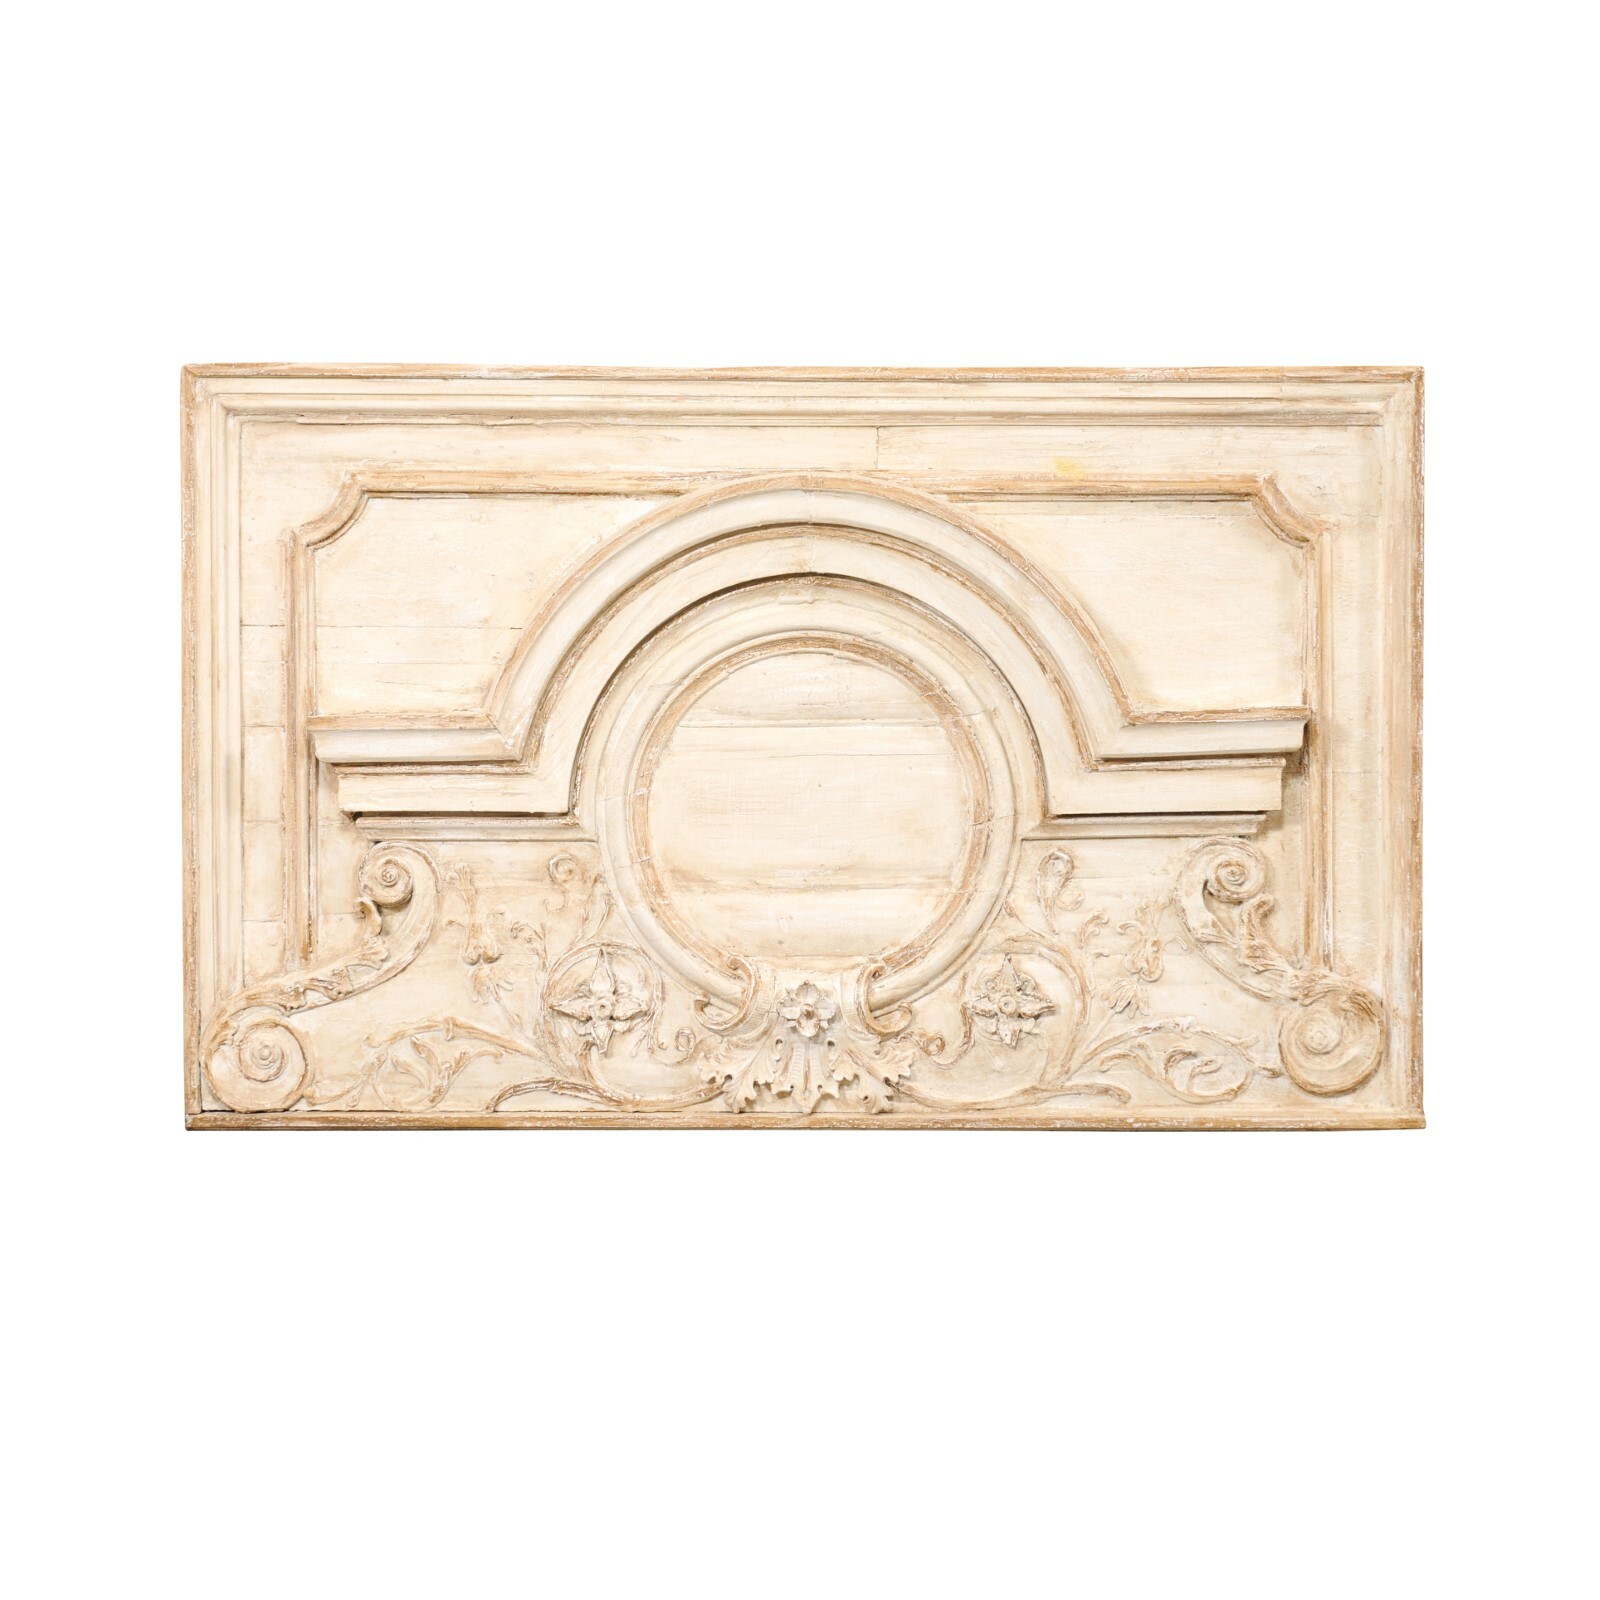 French Relief-Carved Wall Panel, 19th C.